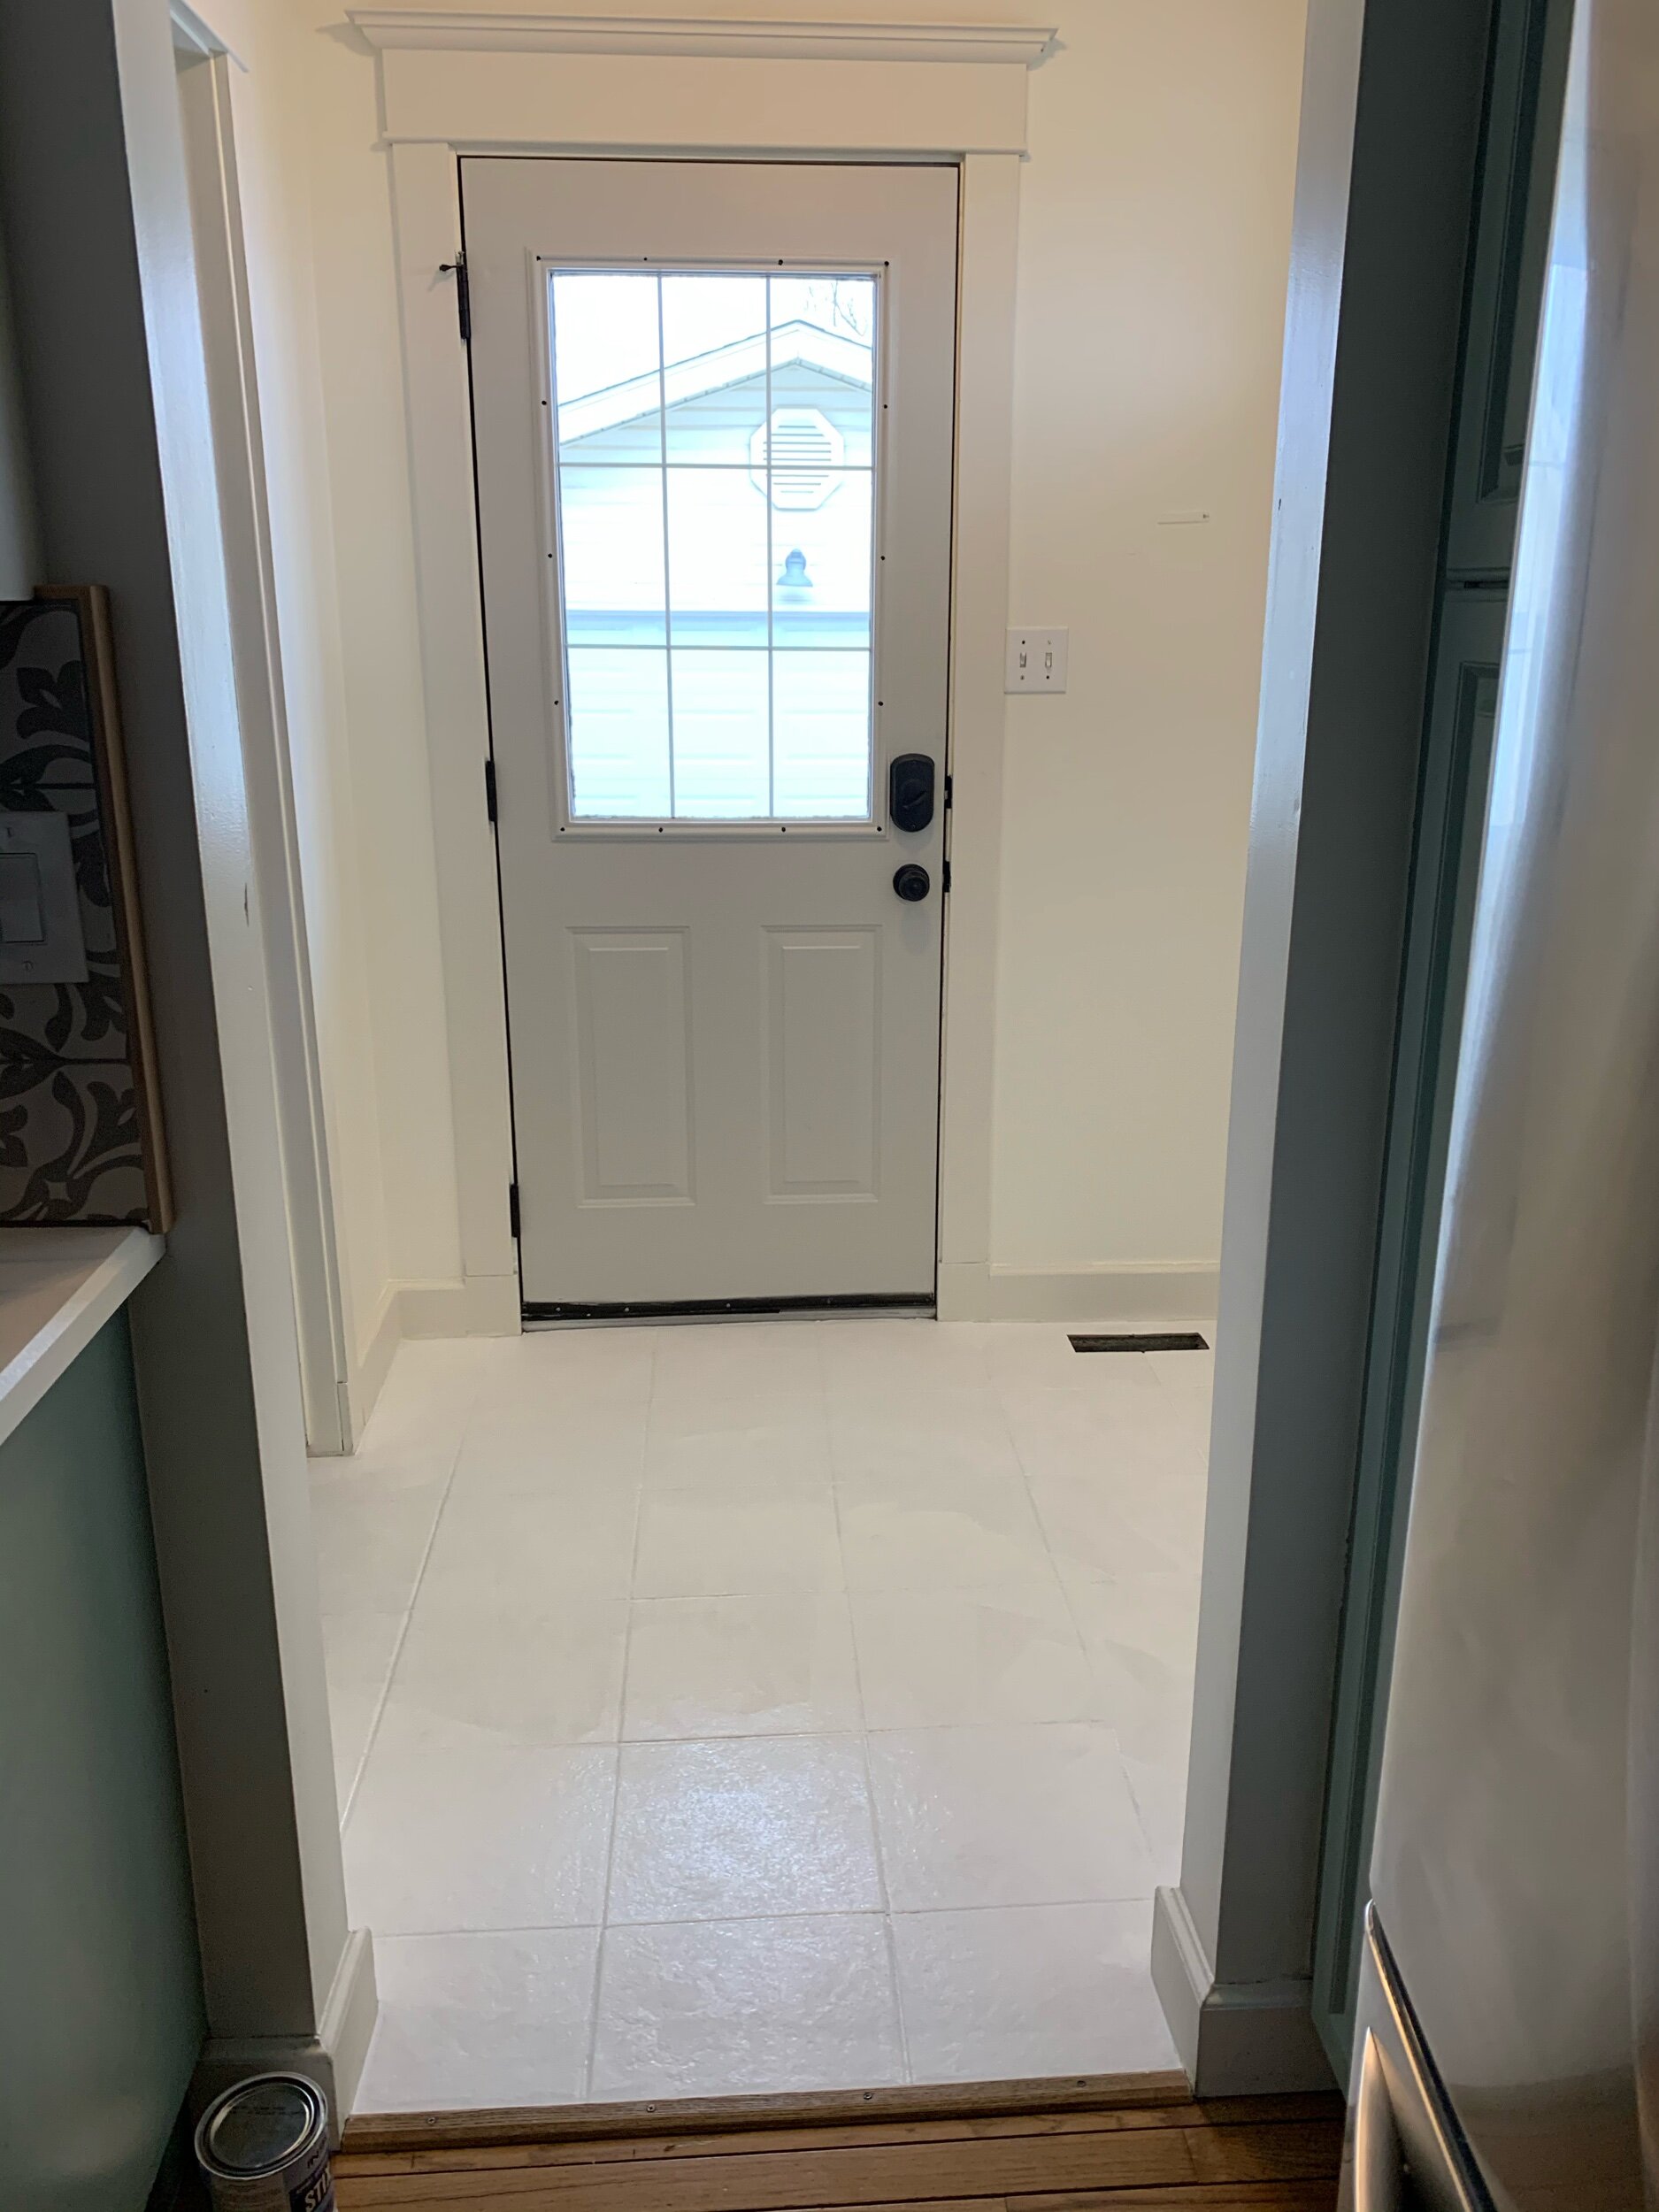 this is a photo of a back entryway with bonding primer on tile floors